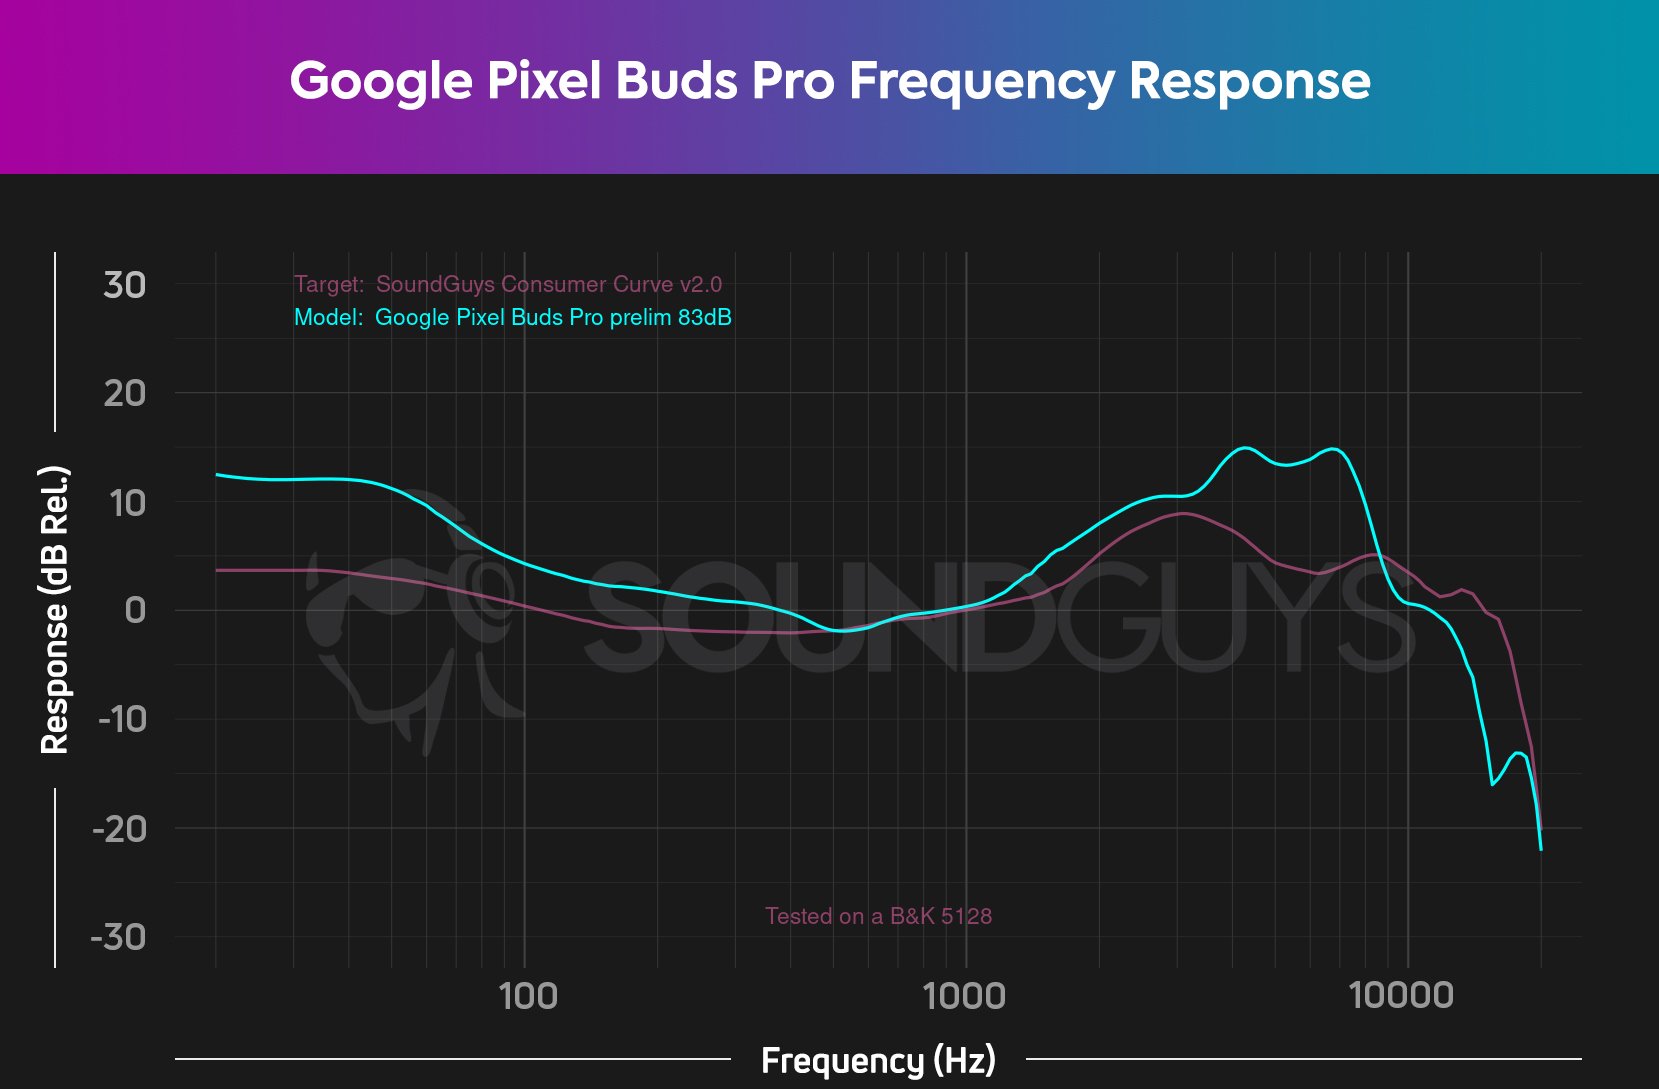 A noise cancelling and isolation chart for the Google Pixel Buds Pro, which shows very good low end attenuation for a pair of true wireless earbuds.